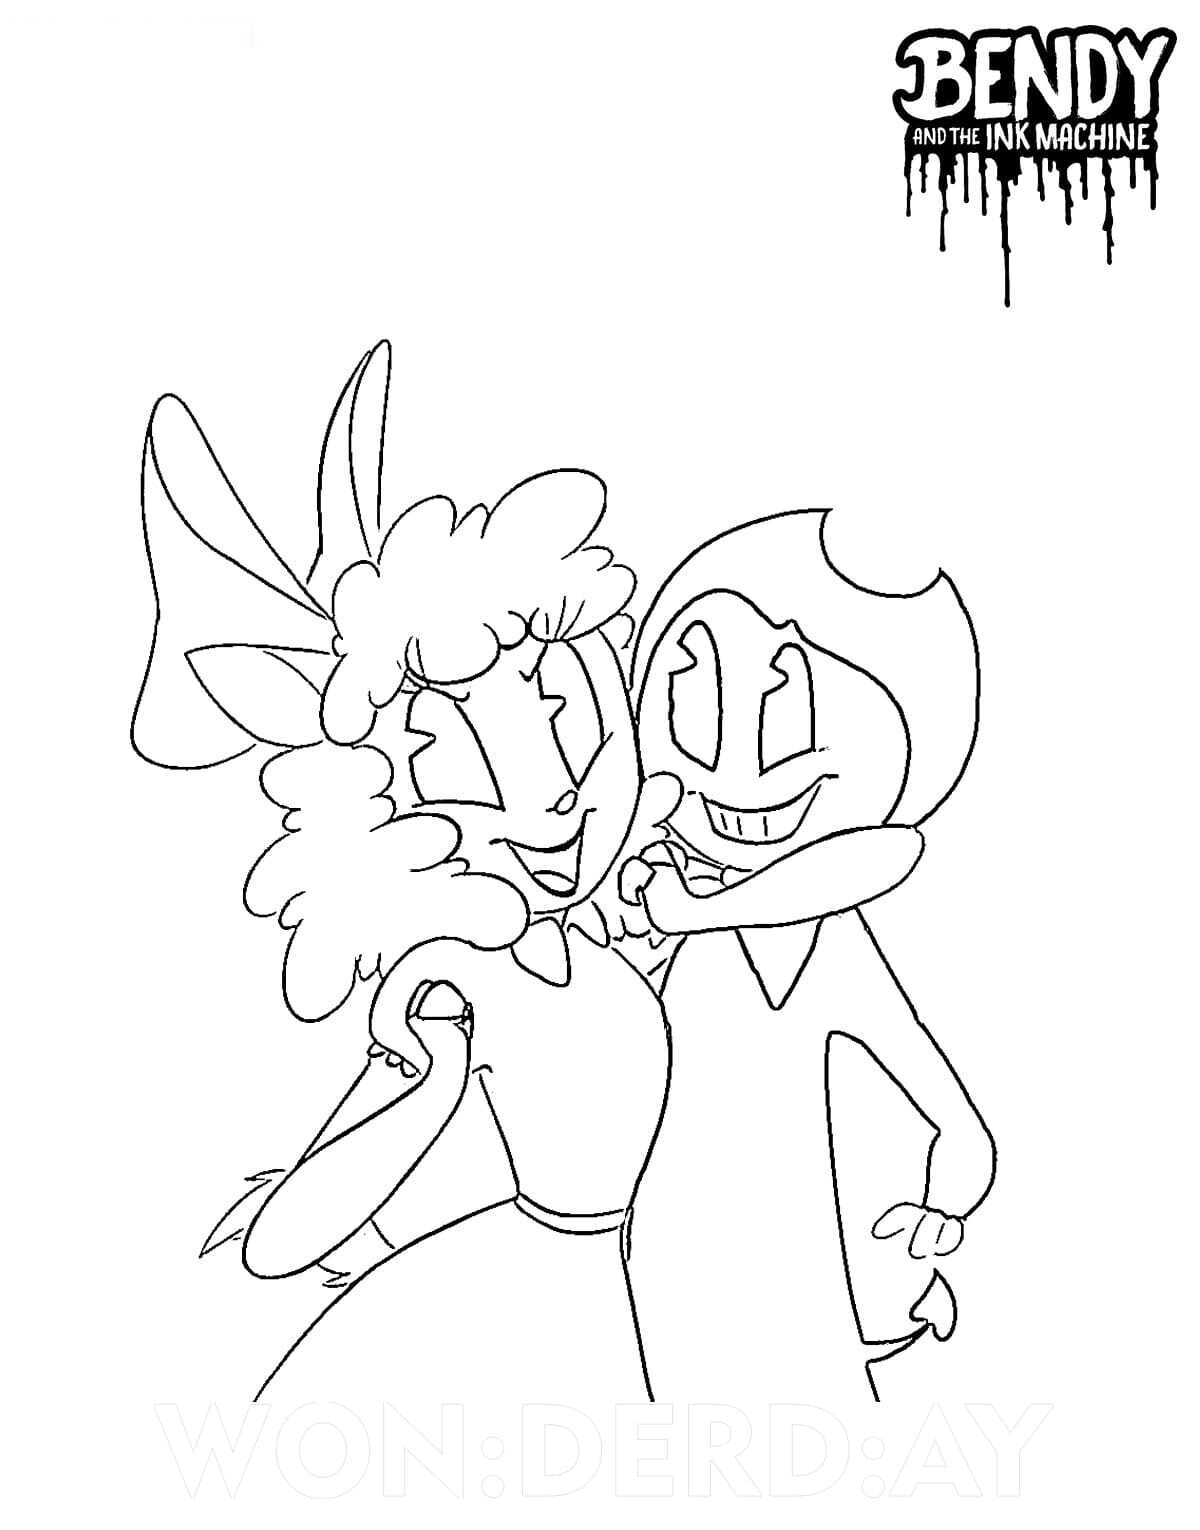 Lady Sheep Hugs Bendy From Bendy And The Ink Machine Coloring Pages